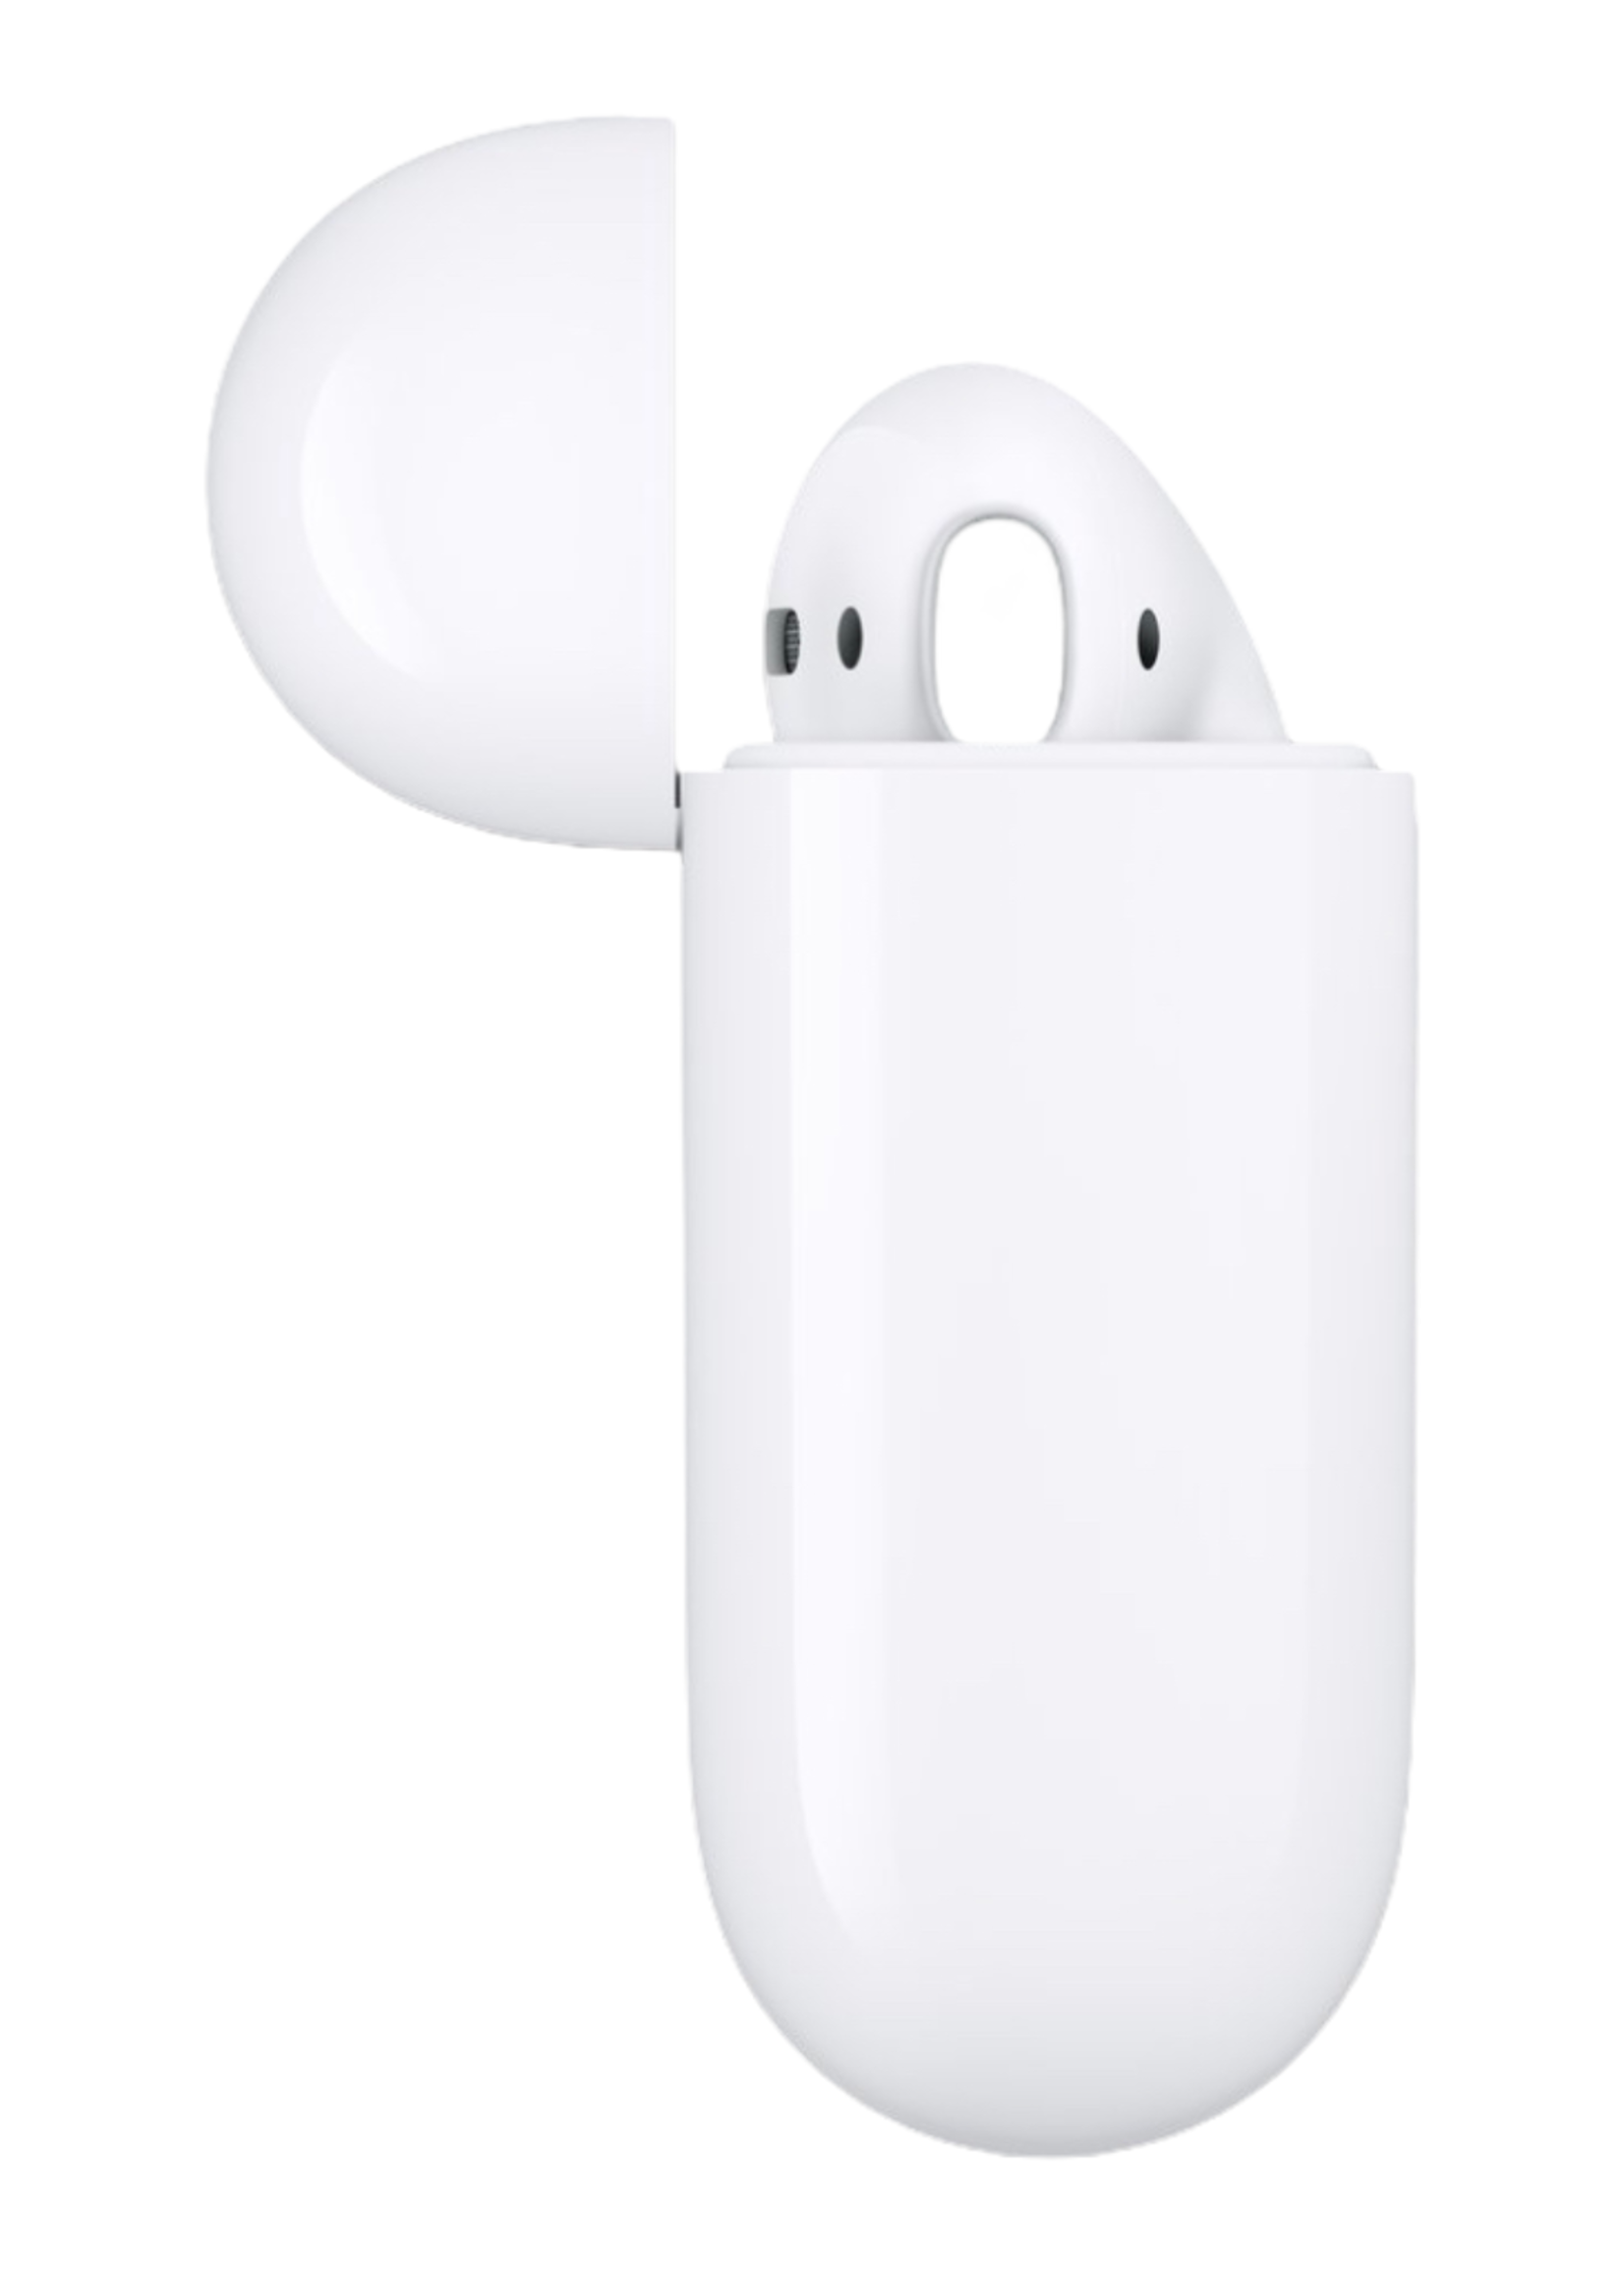 Apple Apple AirPods (2nd Generation) Wireless Earbuds with Lightning Charging Case